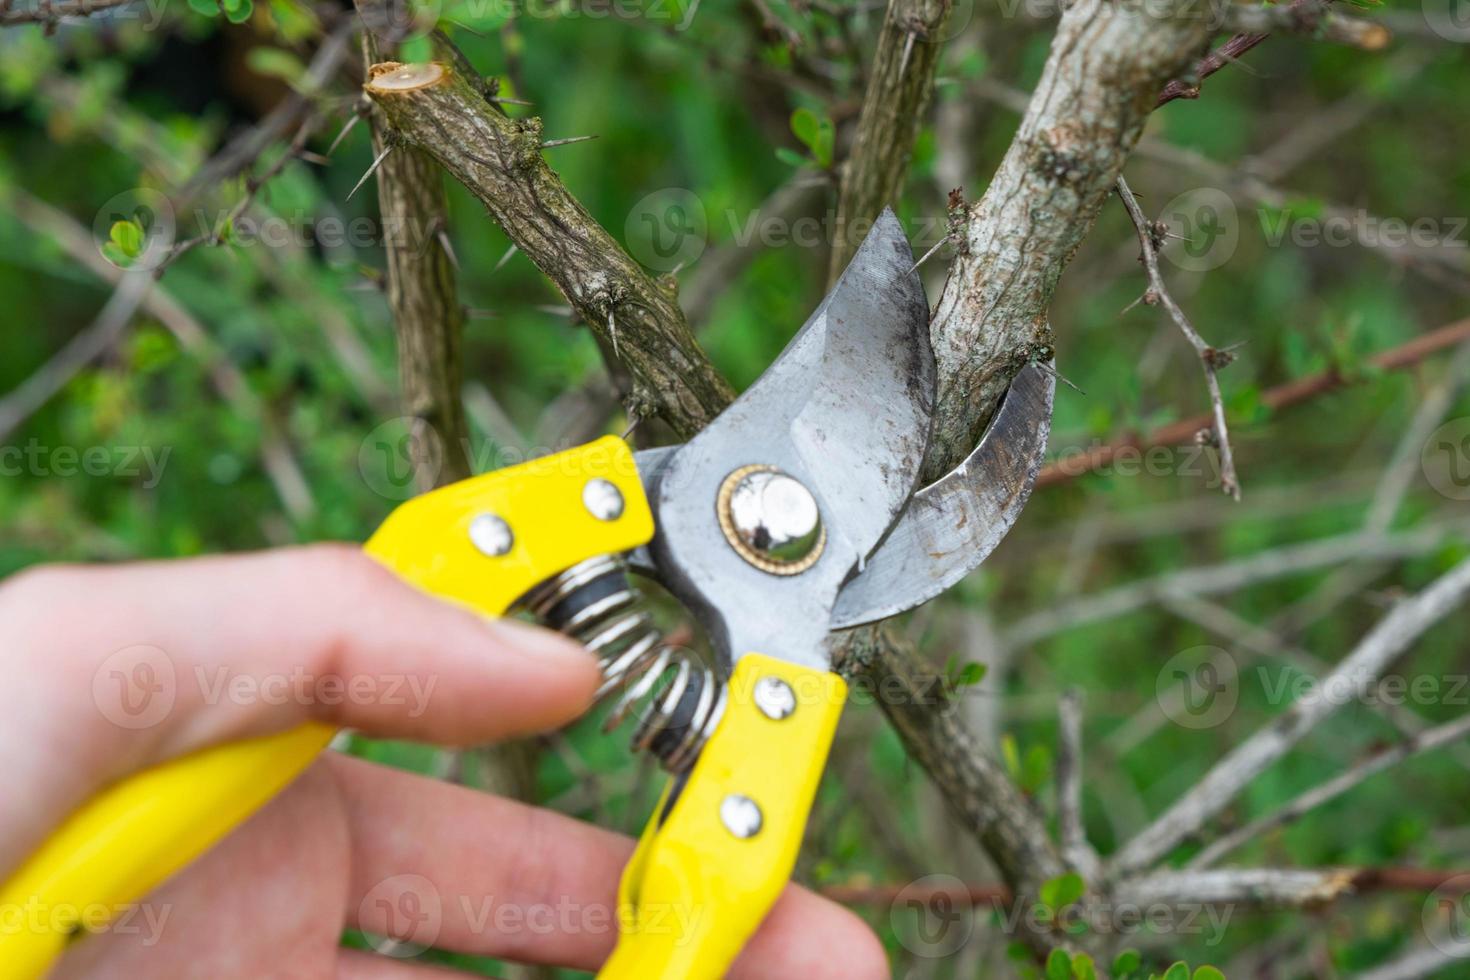 Pruning branches of the barberry bush with pruner shears in spring. The formation of the crown of a fruit trees, garden care. The gardener's hand is looking for a place to cut the branch correctly photo